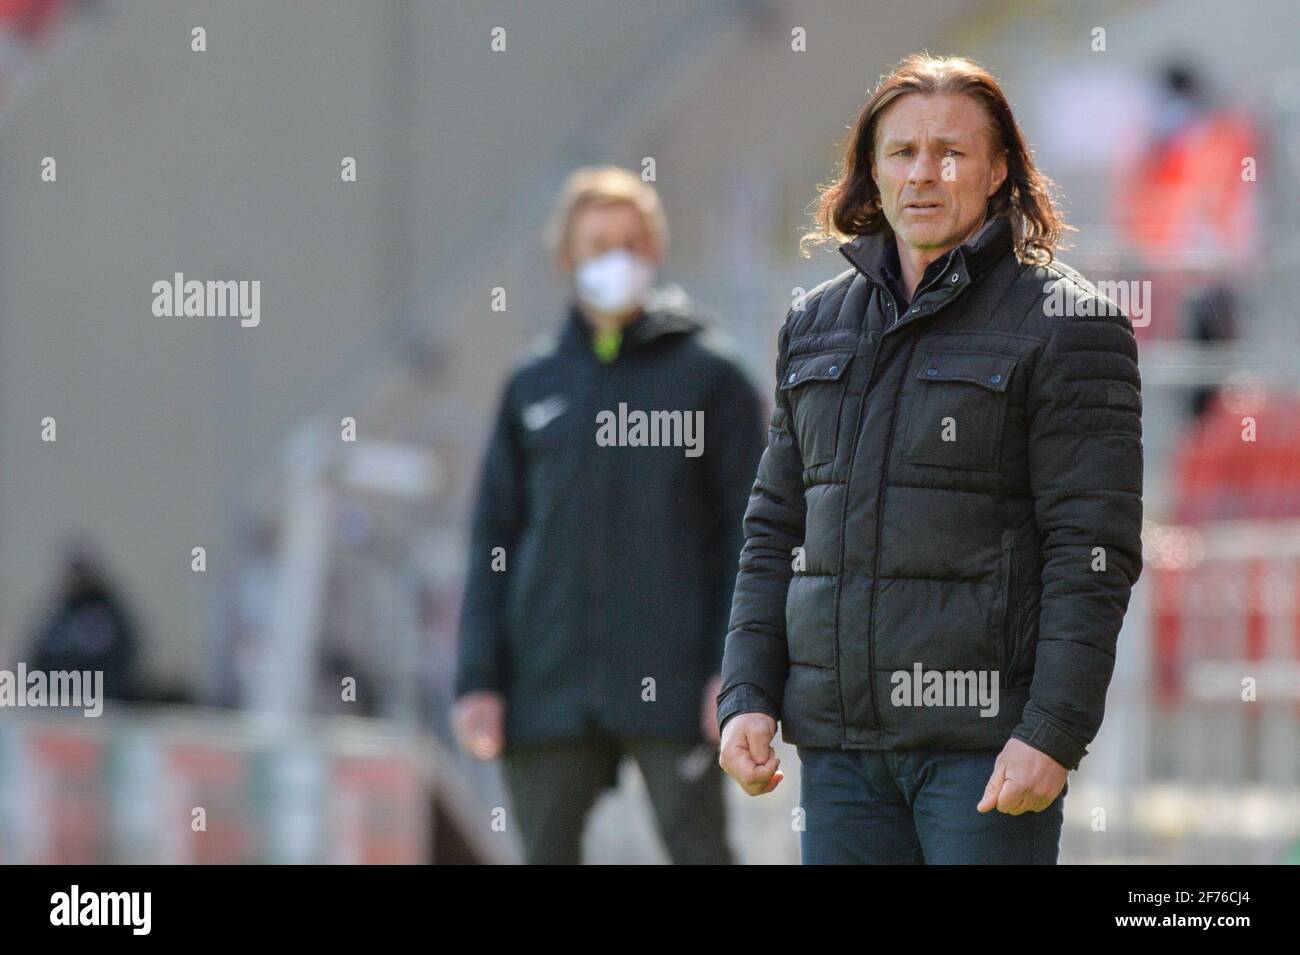 Rotherham, UK. 23rd Mar, 2021. Gareth Ainsworth manager of Wycombe Wanderers during the game in Rotherham, UK on 3/23/2021. (Photo by Dean Williams/News Images/Sipa USA) Credit: Sipa USA/Alamy Live News Stock Photo